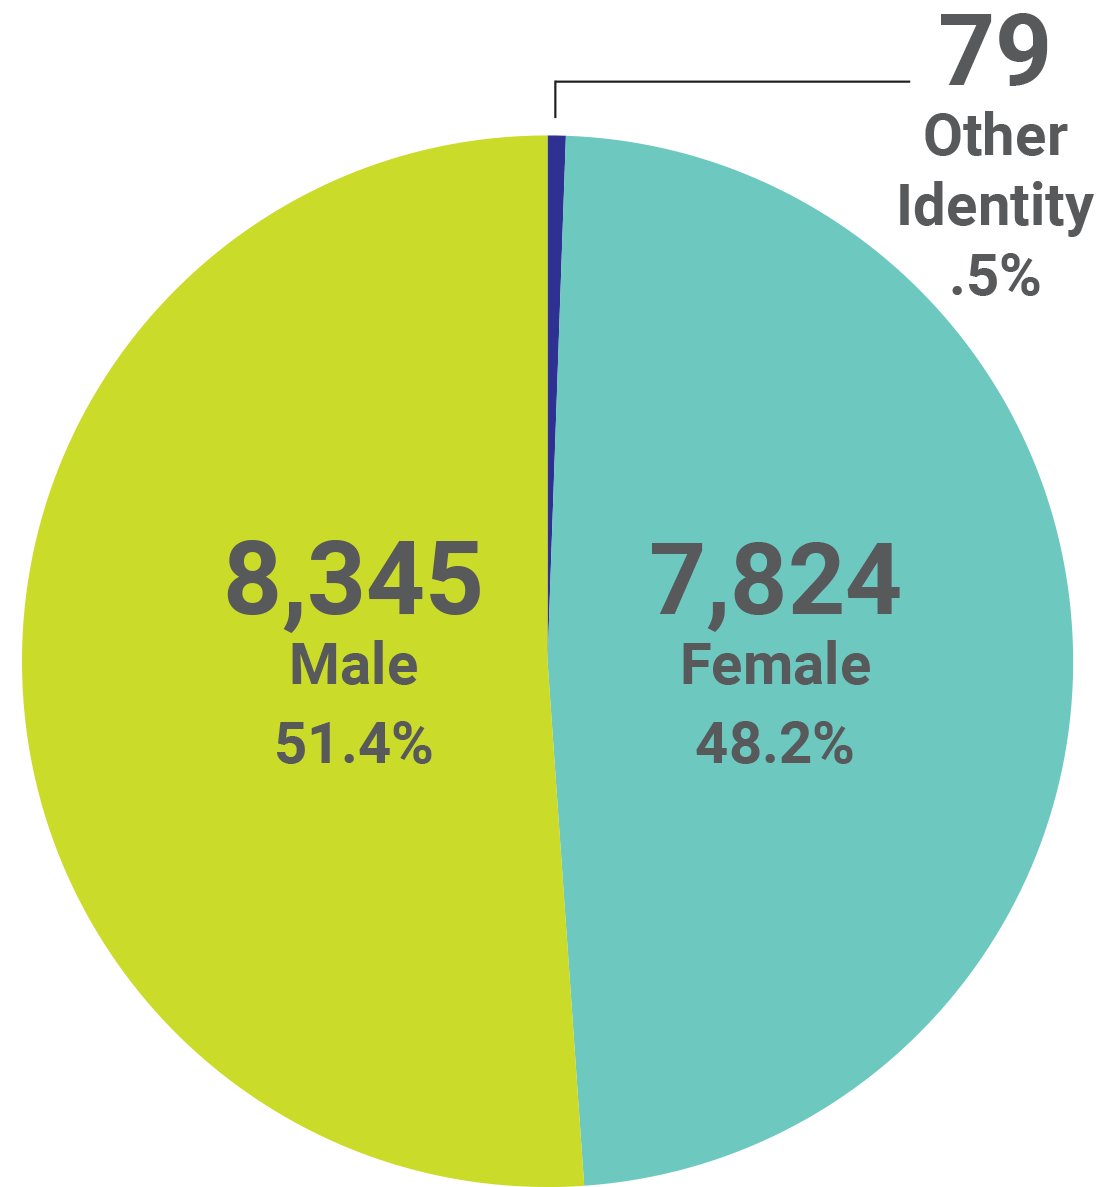 Graphic showing the demographics of students by gender identity. Male with 8,345 at 51.4%, Female with 7,824 at 48.2%, and Other Identity with 79 at 0.5%. 